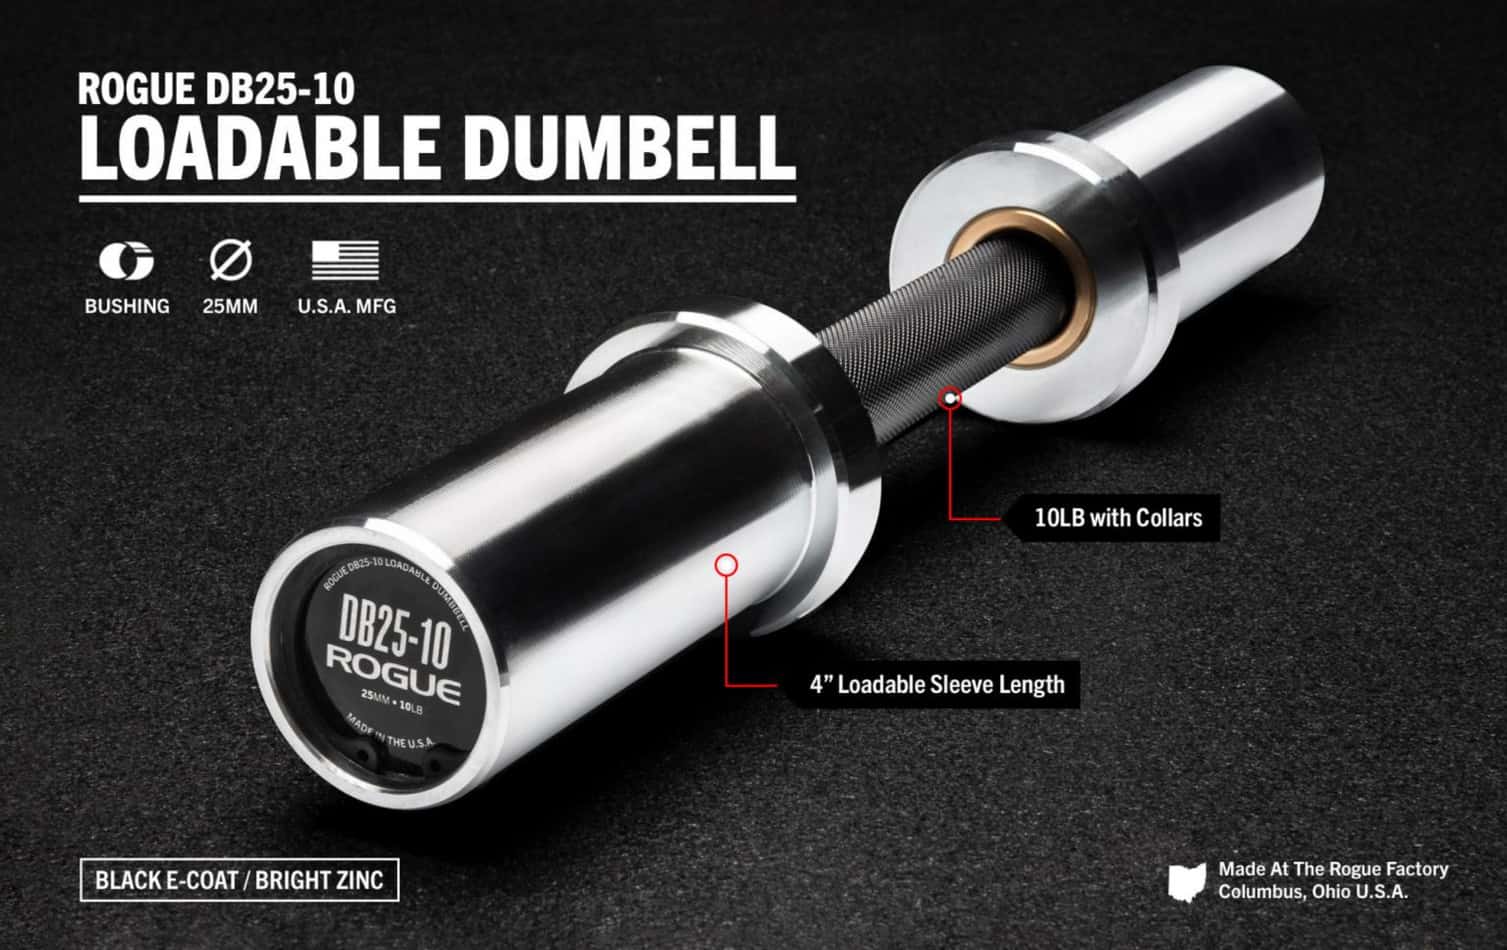 Rogue DB25-10 Loadable Dumbbell